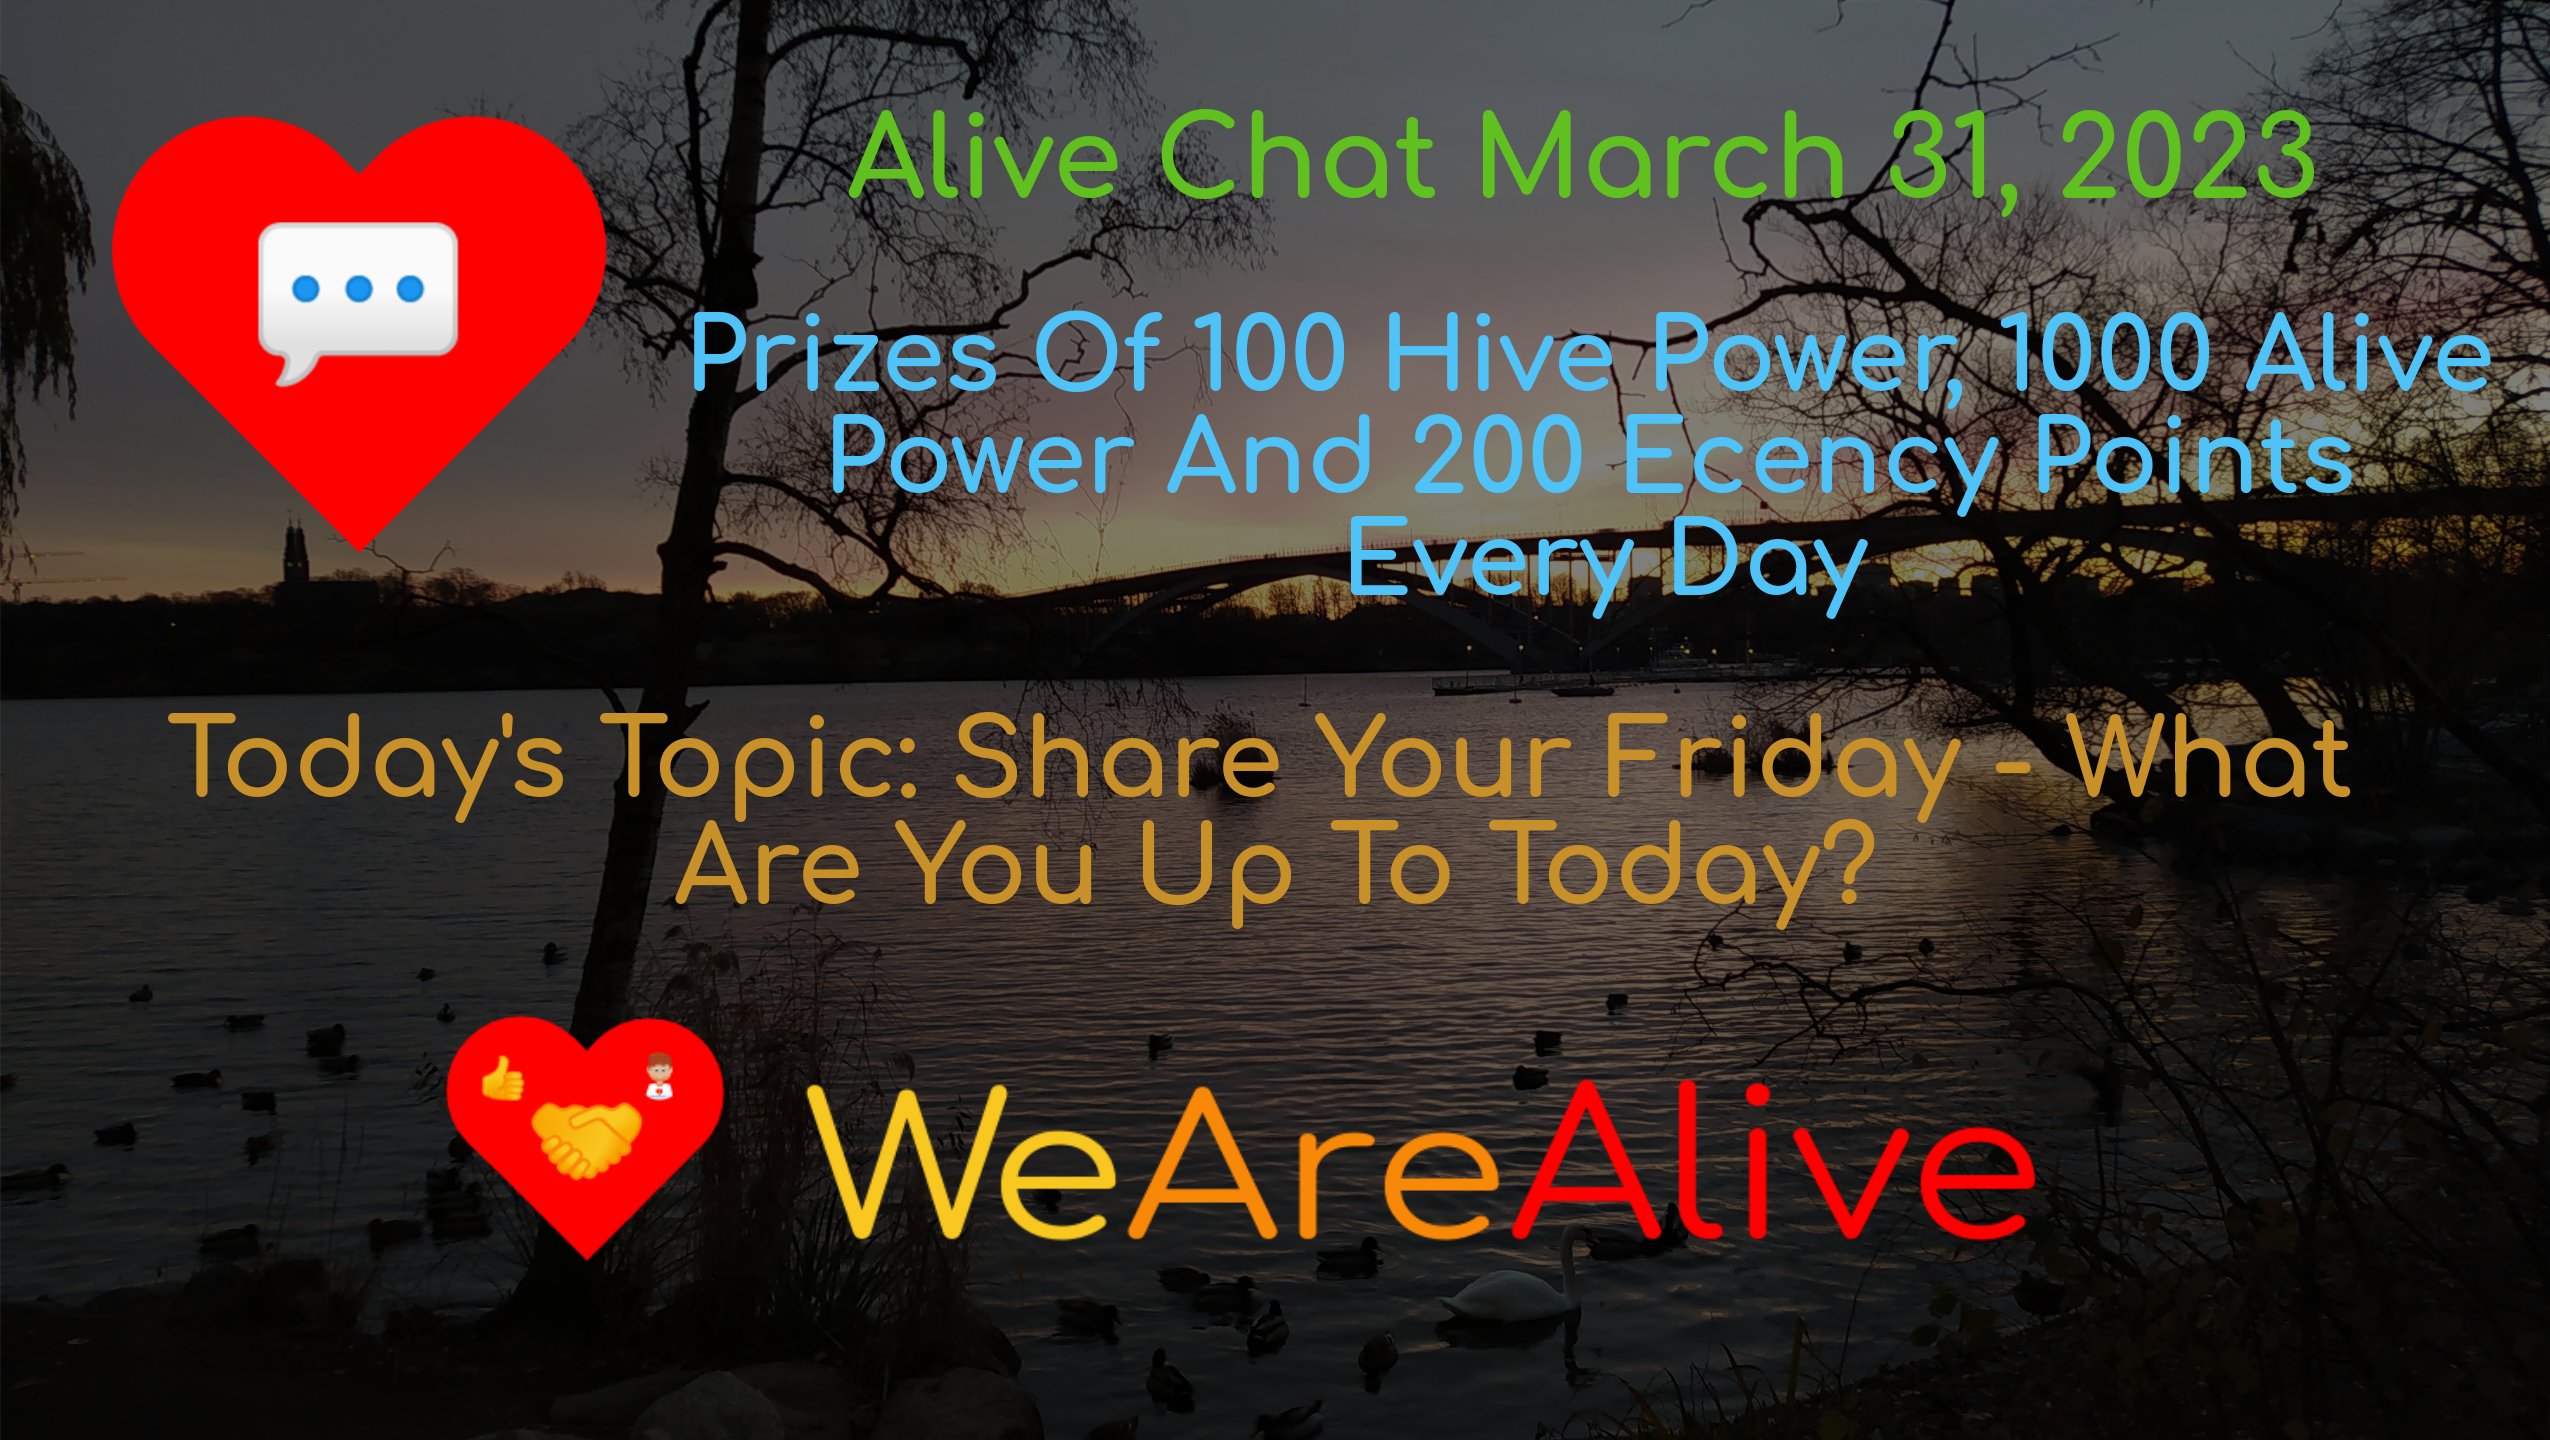 @alive.chat/alive-chat-march-31-2023